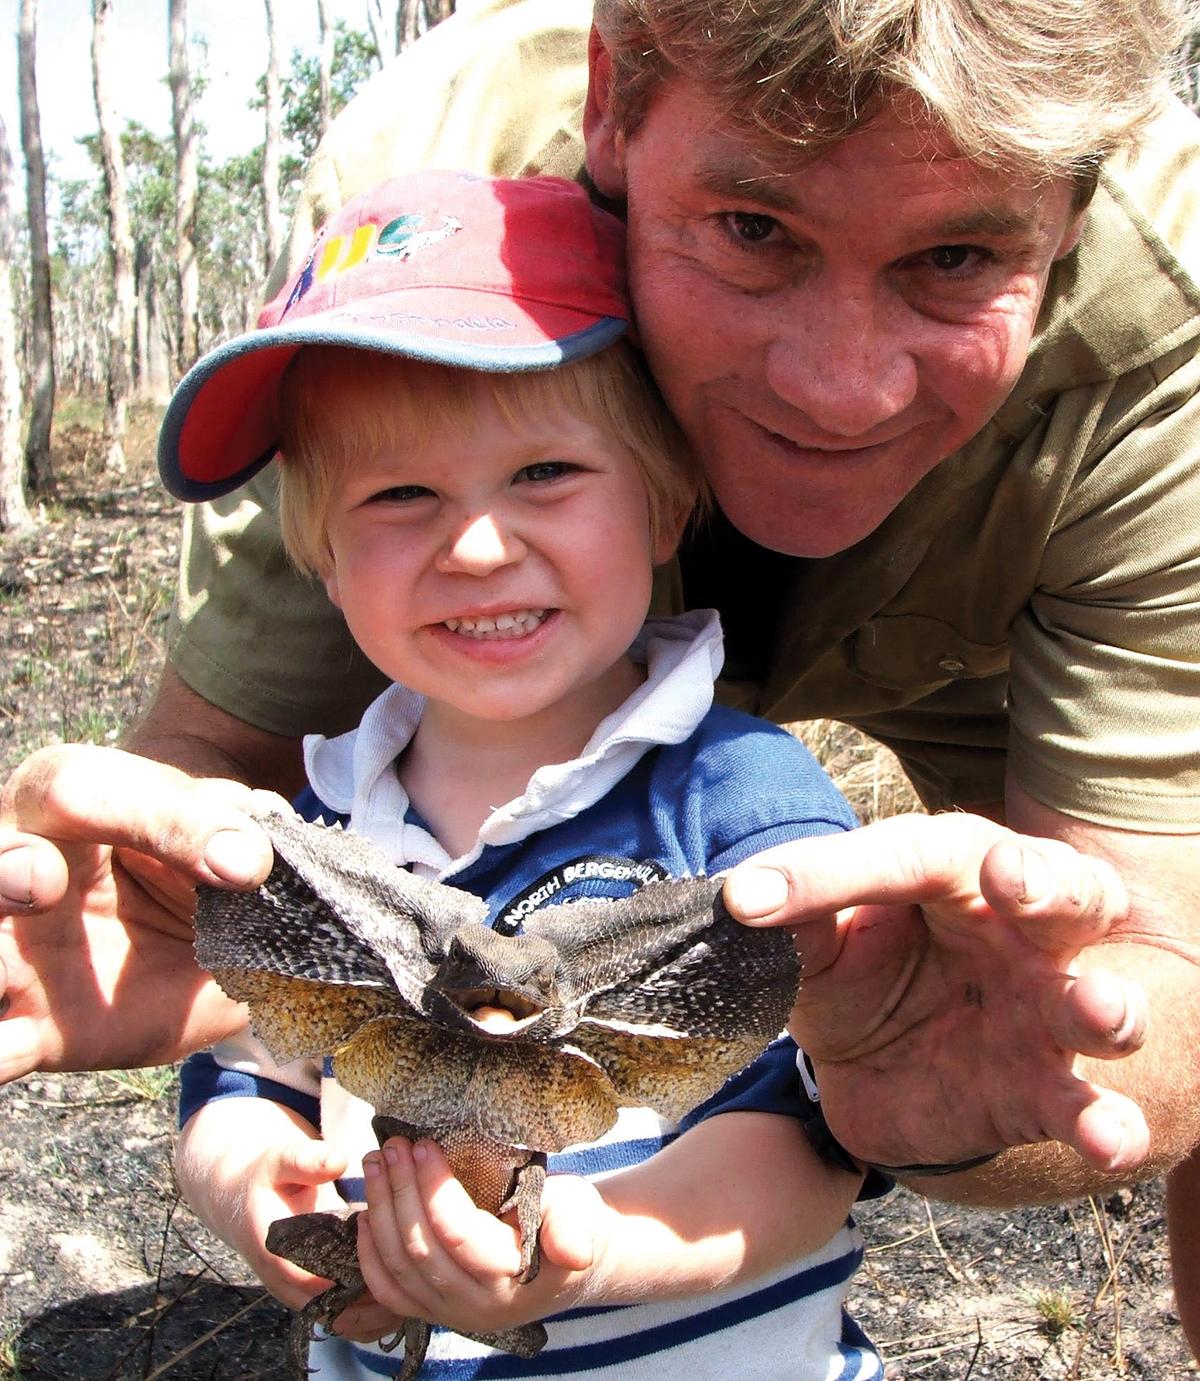 Steve Irwin poses with his son, Robert, at Australia Zoo Aug. 2, 2006, in Beerwah, Australia. (©Getty Images | <a href="https://www.gettyimages.ca/detail/news-photo/steve-irwin-poses-with-his-son-bob-at-australia-zoo-august-news-photo/77794221?adppopup=true">Australia Zoo</a>)